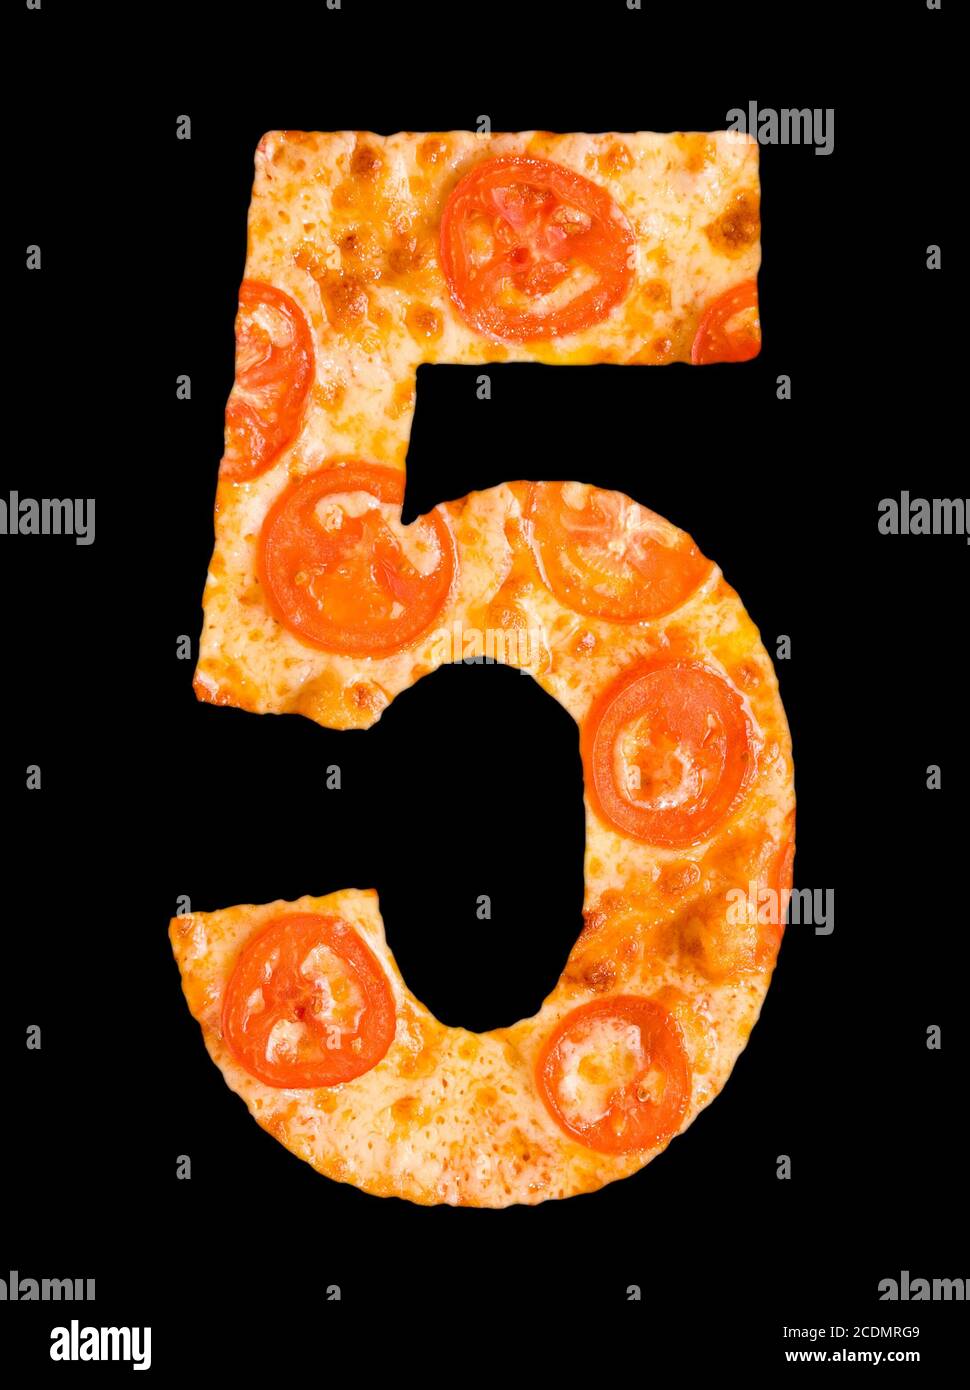 numeral 5 cut out of tomato pizza Stock Photo